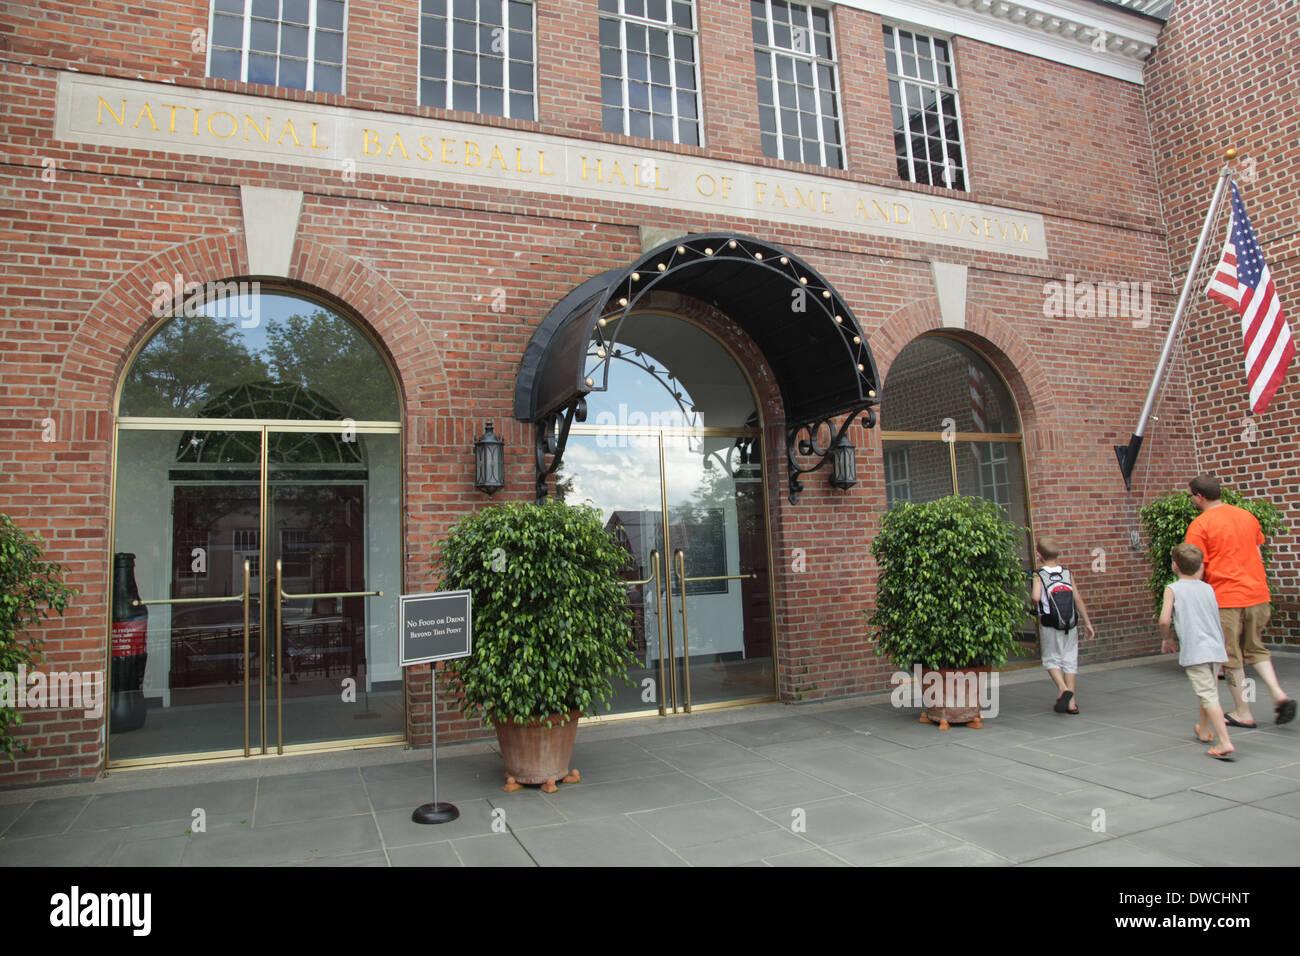 Cooperstown Baseball Hall des Ruhmes - nationaler Baseball Hall des Ruhmes und museum Stockfoto